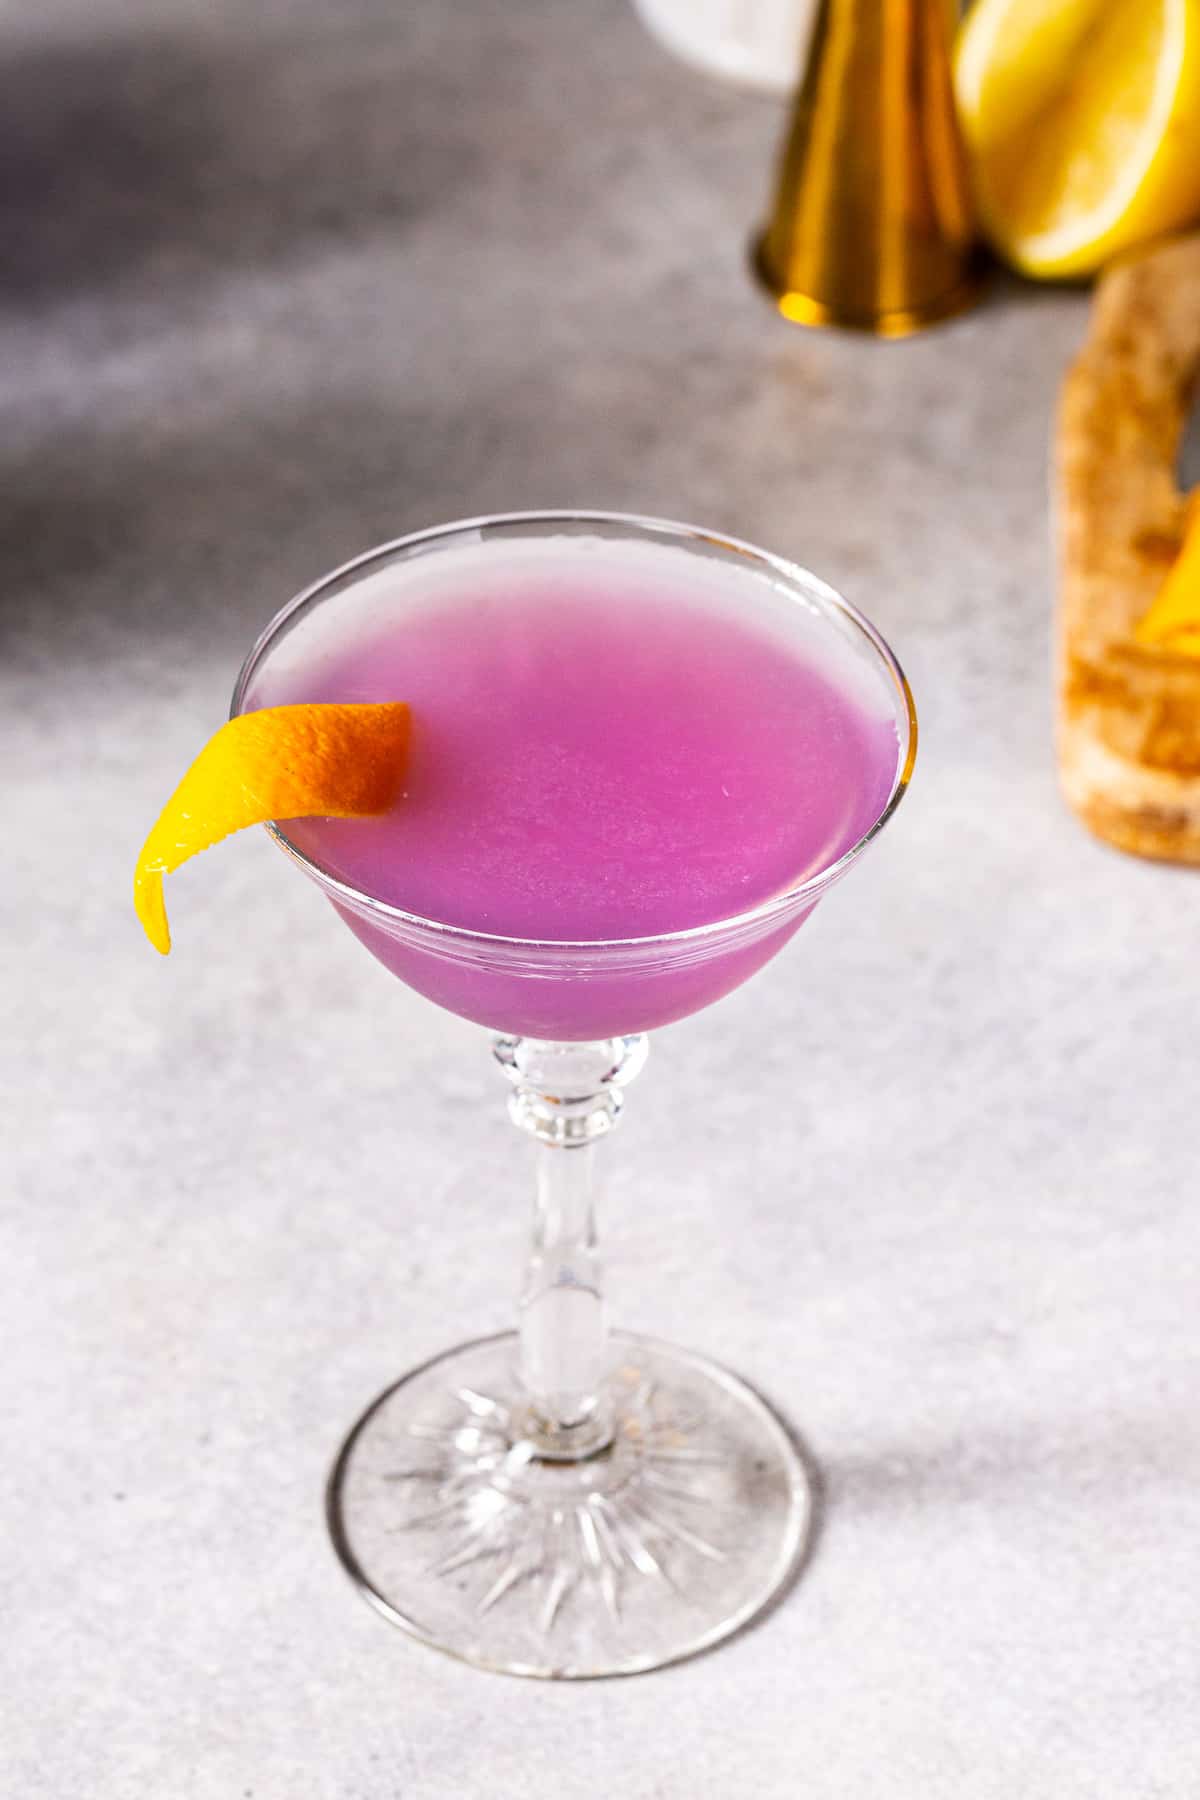 Overhead view or a purple Water lily cocktail in a coupe glass with an orange peel garnish.